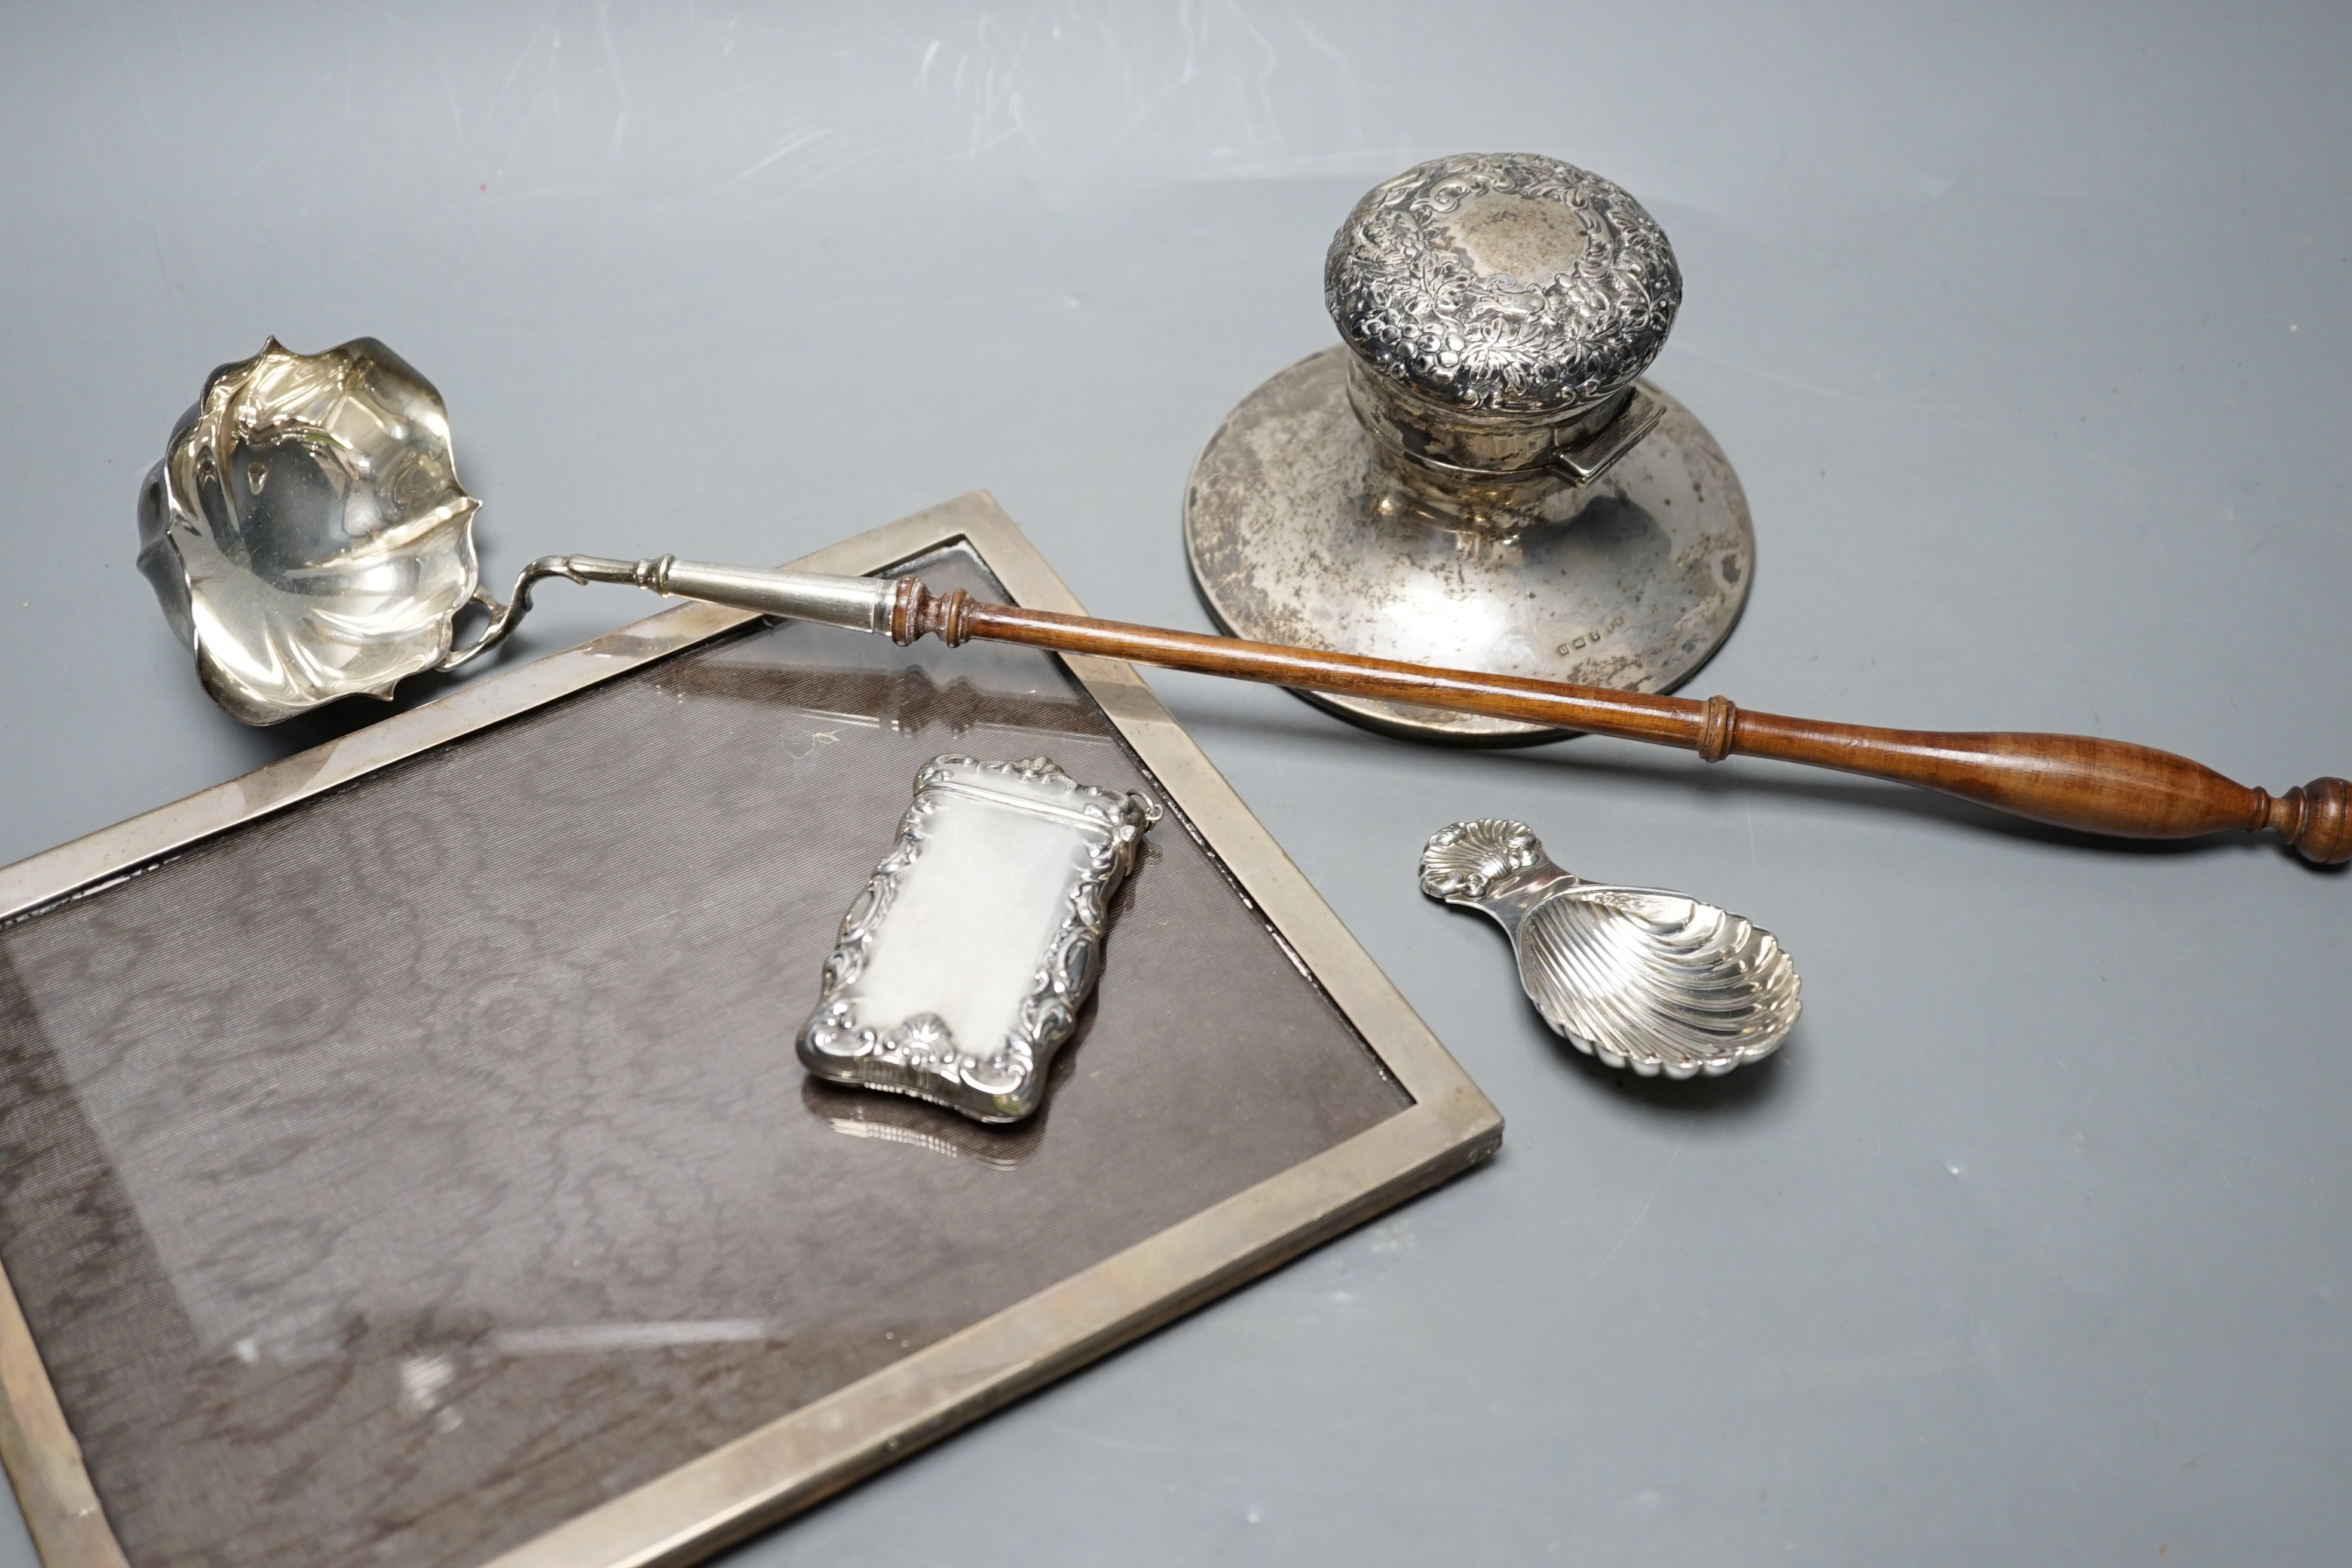 A silver mounted rectangular photograph frame, a modern silver mounted toddy ladle, a silver vesta case, a modern silver caddy spoon and a silver mounted inkwell.